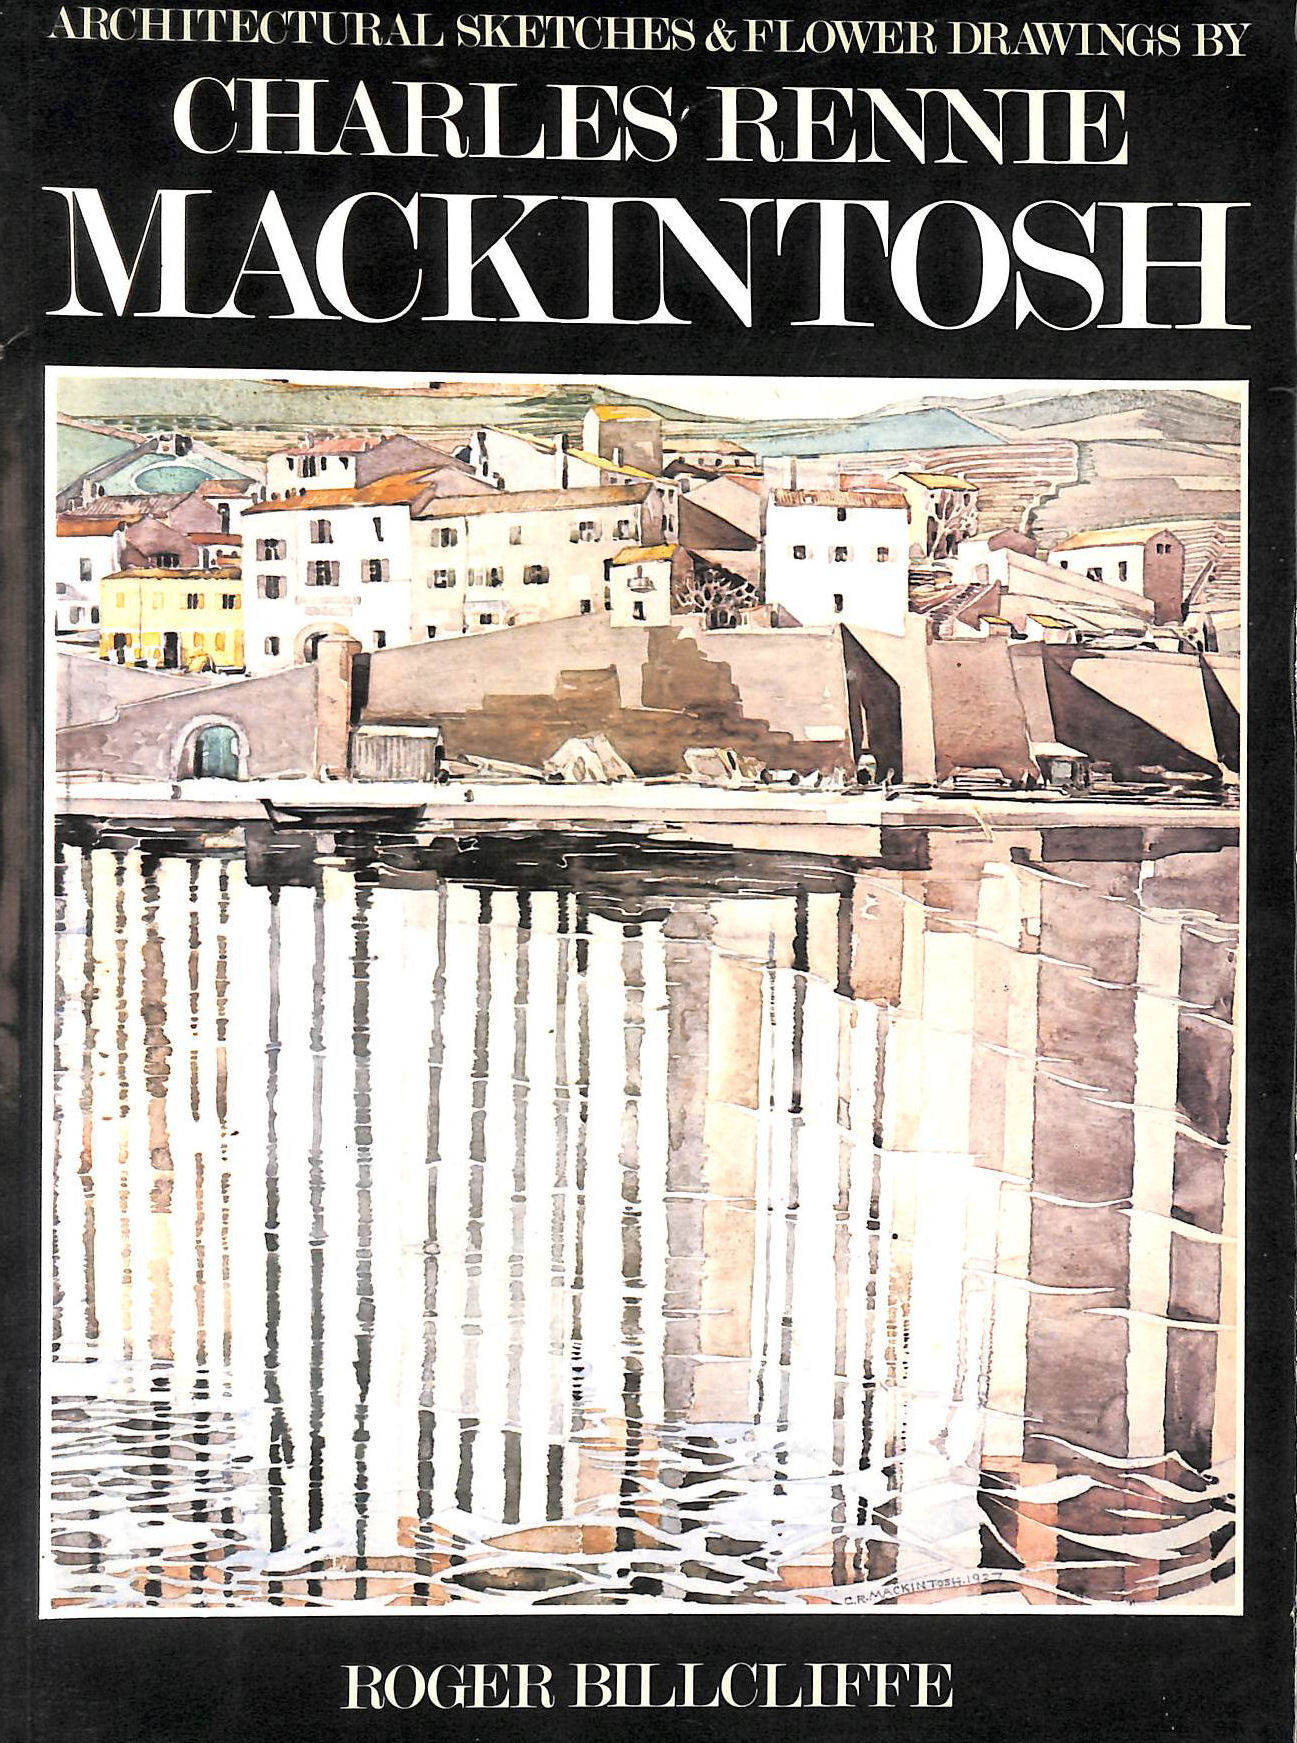 MACKINTOSH, CHARLES RENNIE; BILLCLIFFE, ROGER [EDITOR] - Architectural Sketches and Flower Drawings